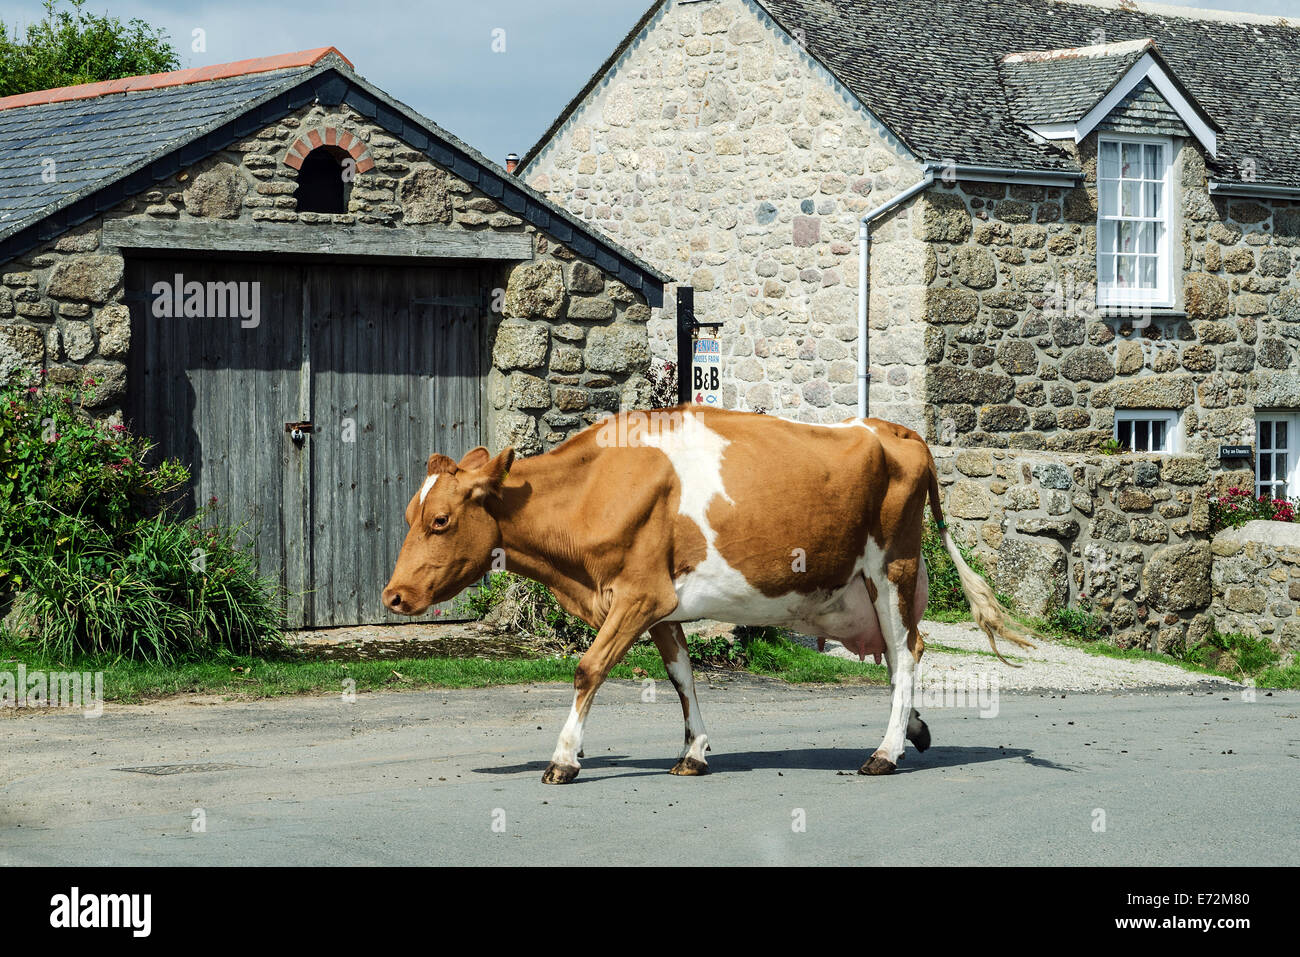 A Jersey Cow walking through the Hamlet of Treen near Porthcurno in Cornwall, UK Stock Photo